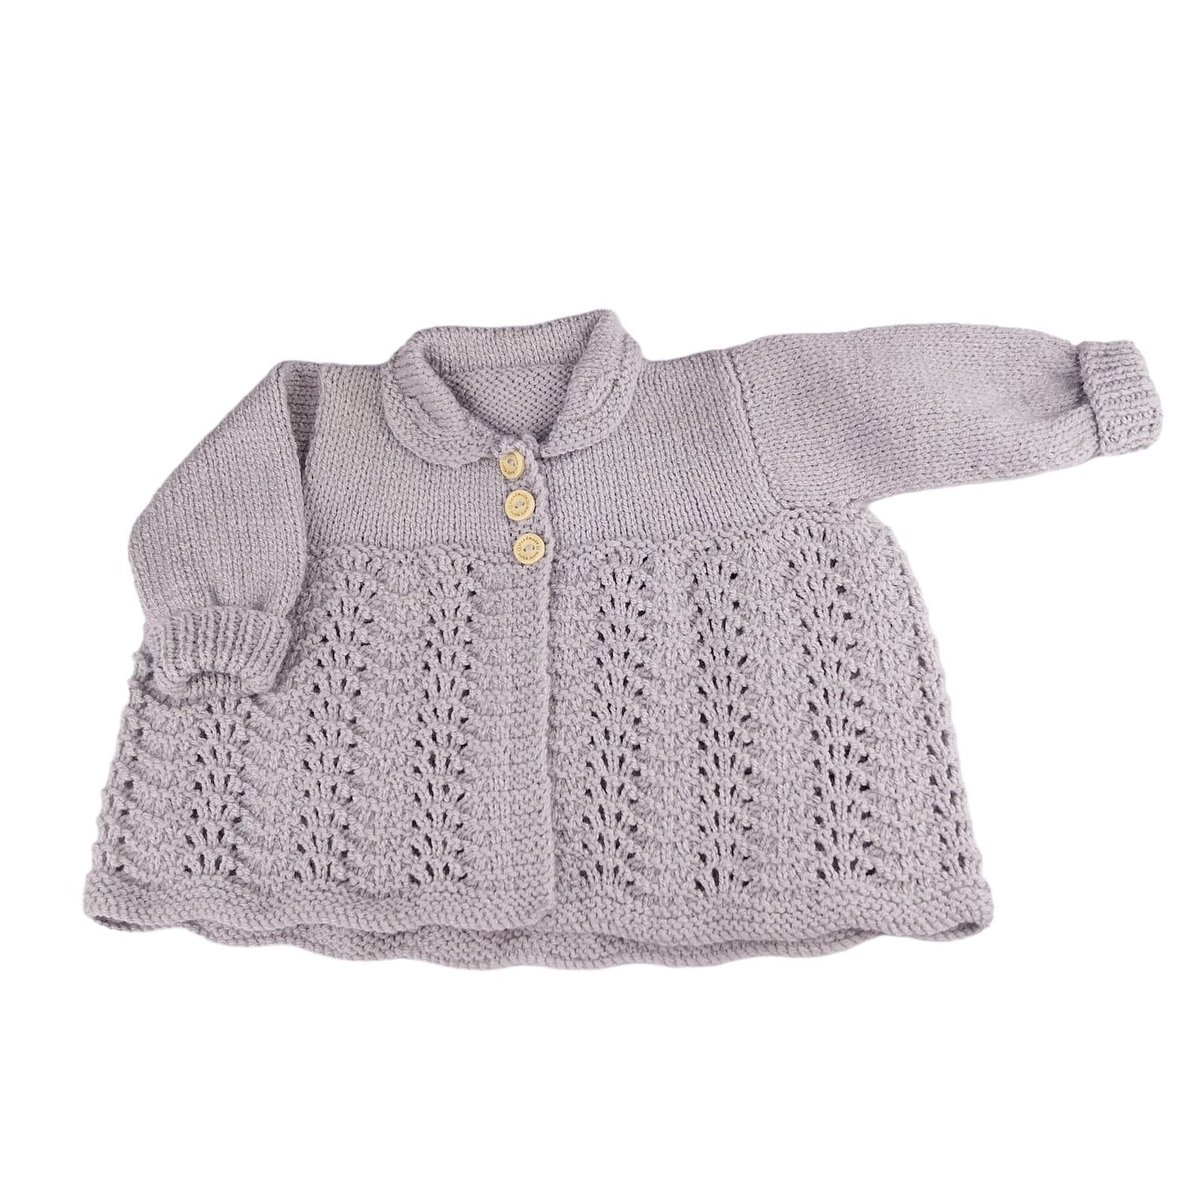 Looking for a unique baby shower gift? This Hand Knitted Gender Neutral Baby Cardigan in Silver Grey is just perfect! Grab this adorable collared sweater from #knittingtopia on #etsy. Don't miss out! knittingtopia.etsy.com/listing/165113… #craftbizparty #MHHSBD #shophandmade #buybritish